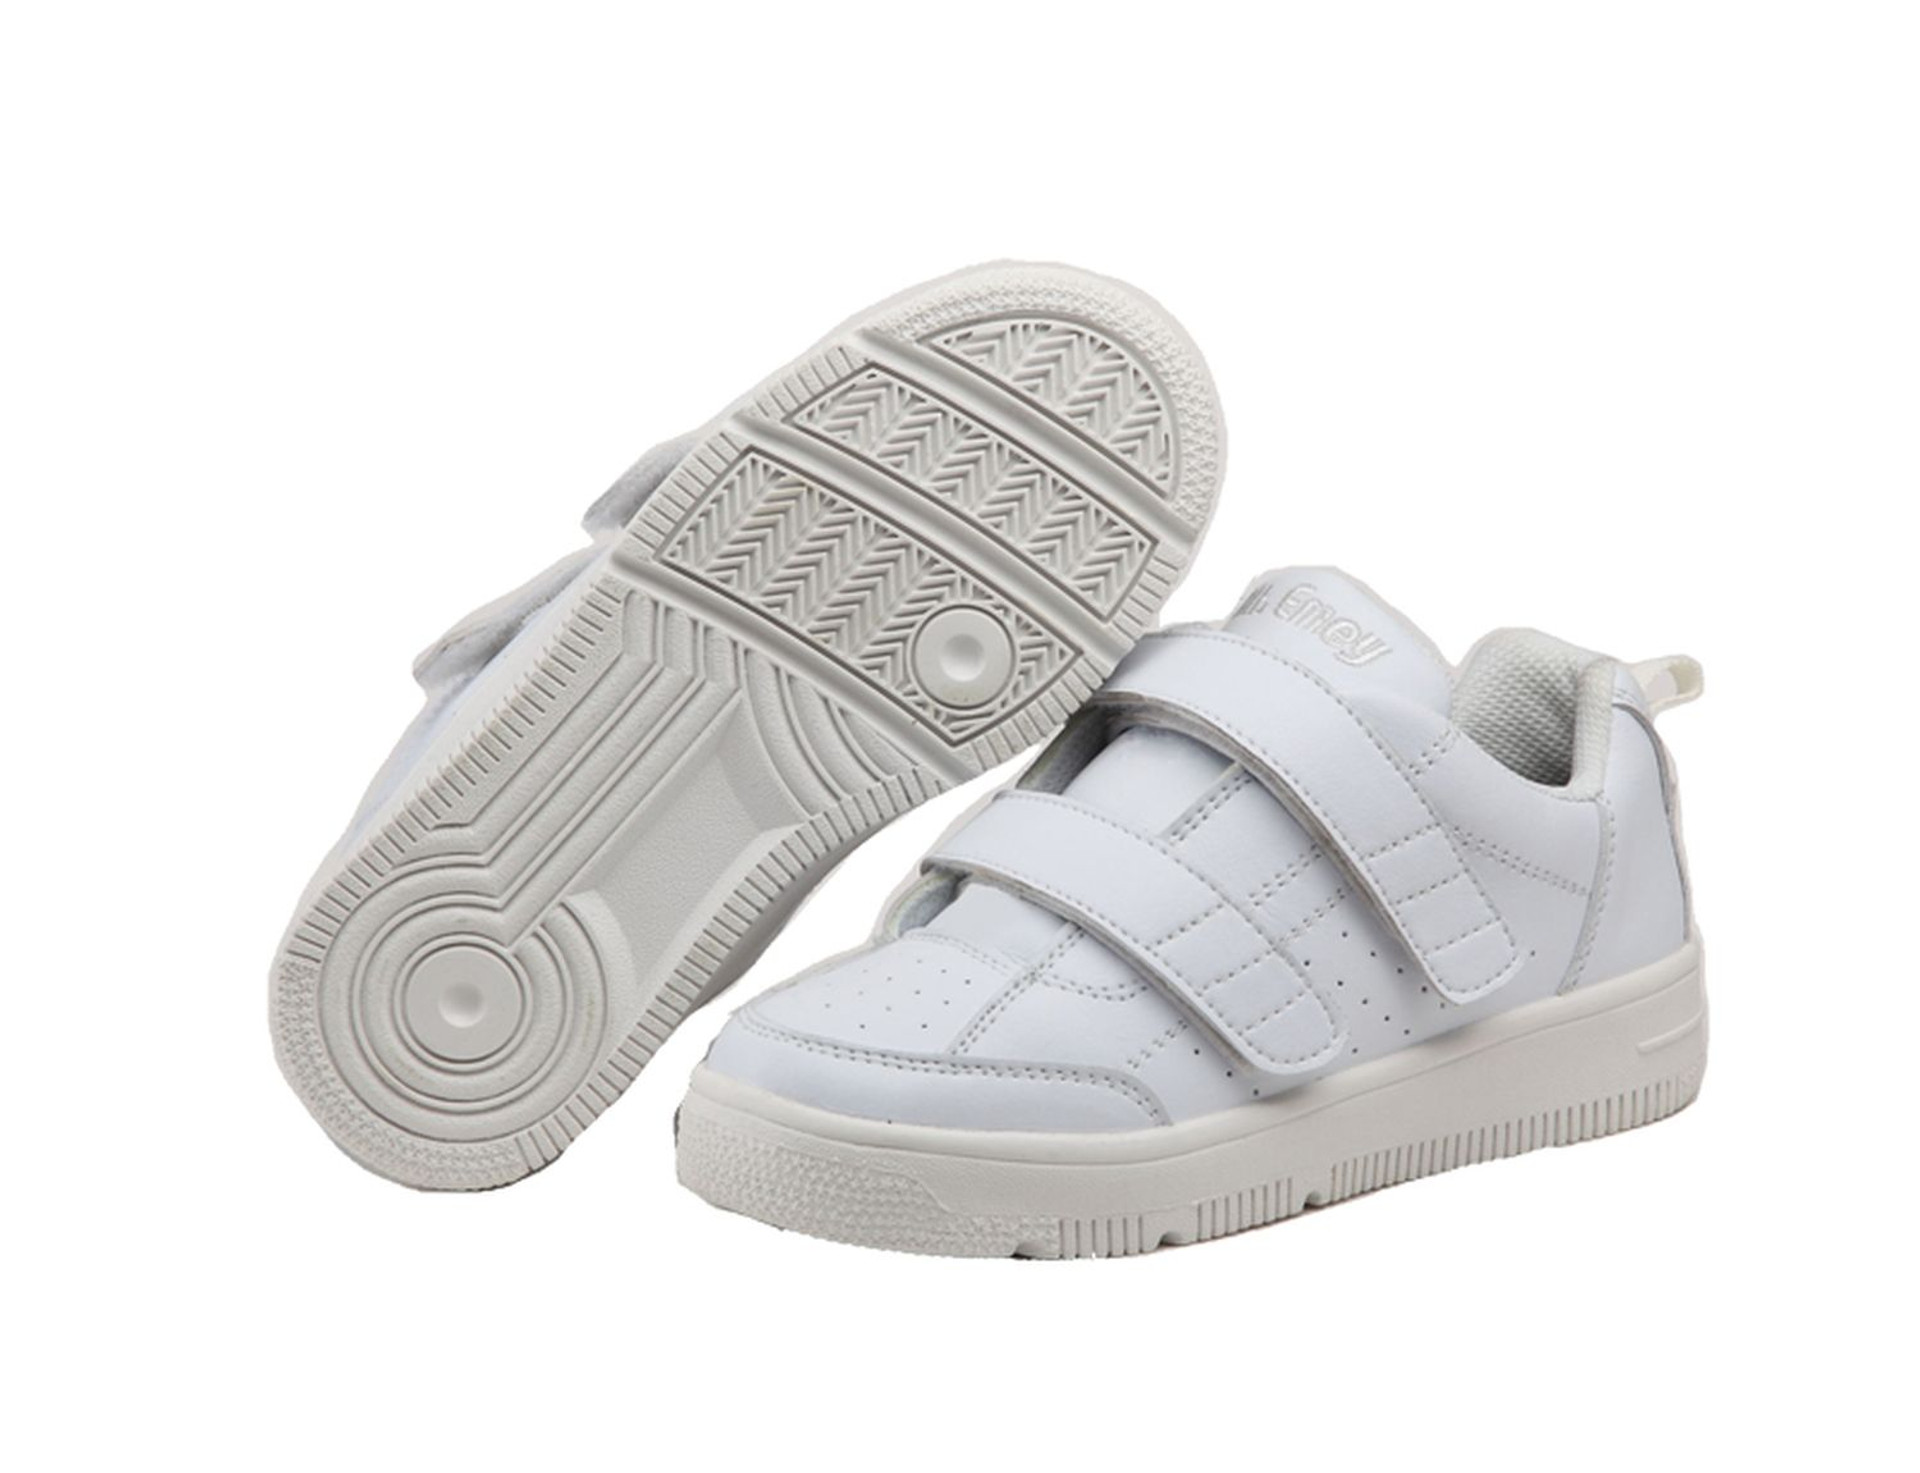 Mt. Emey 2603 Children's Orthopedic Casual Strap Shoes - Free Shipping